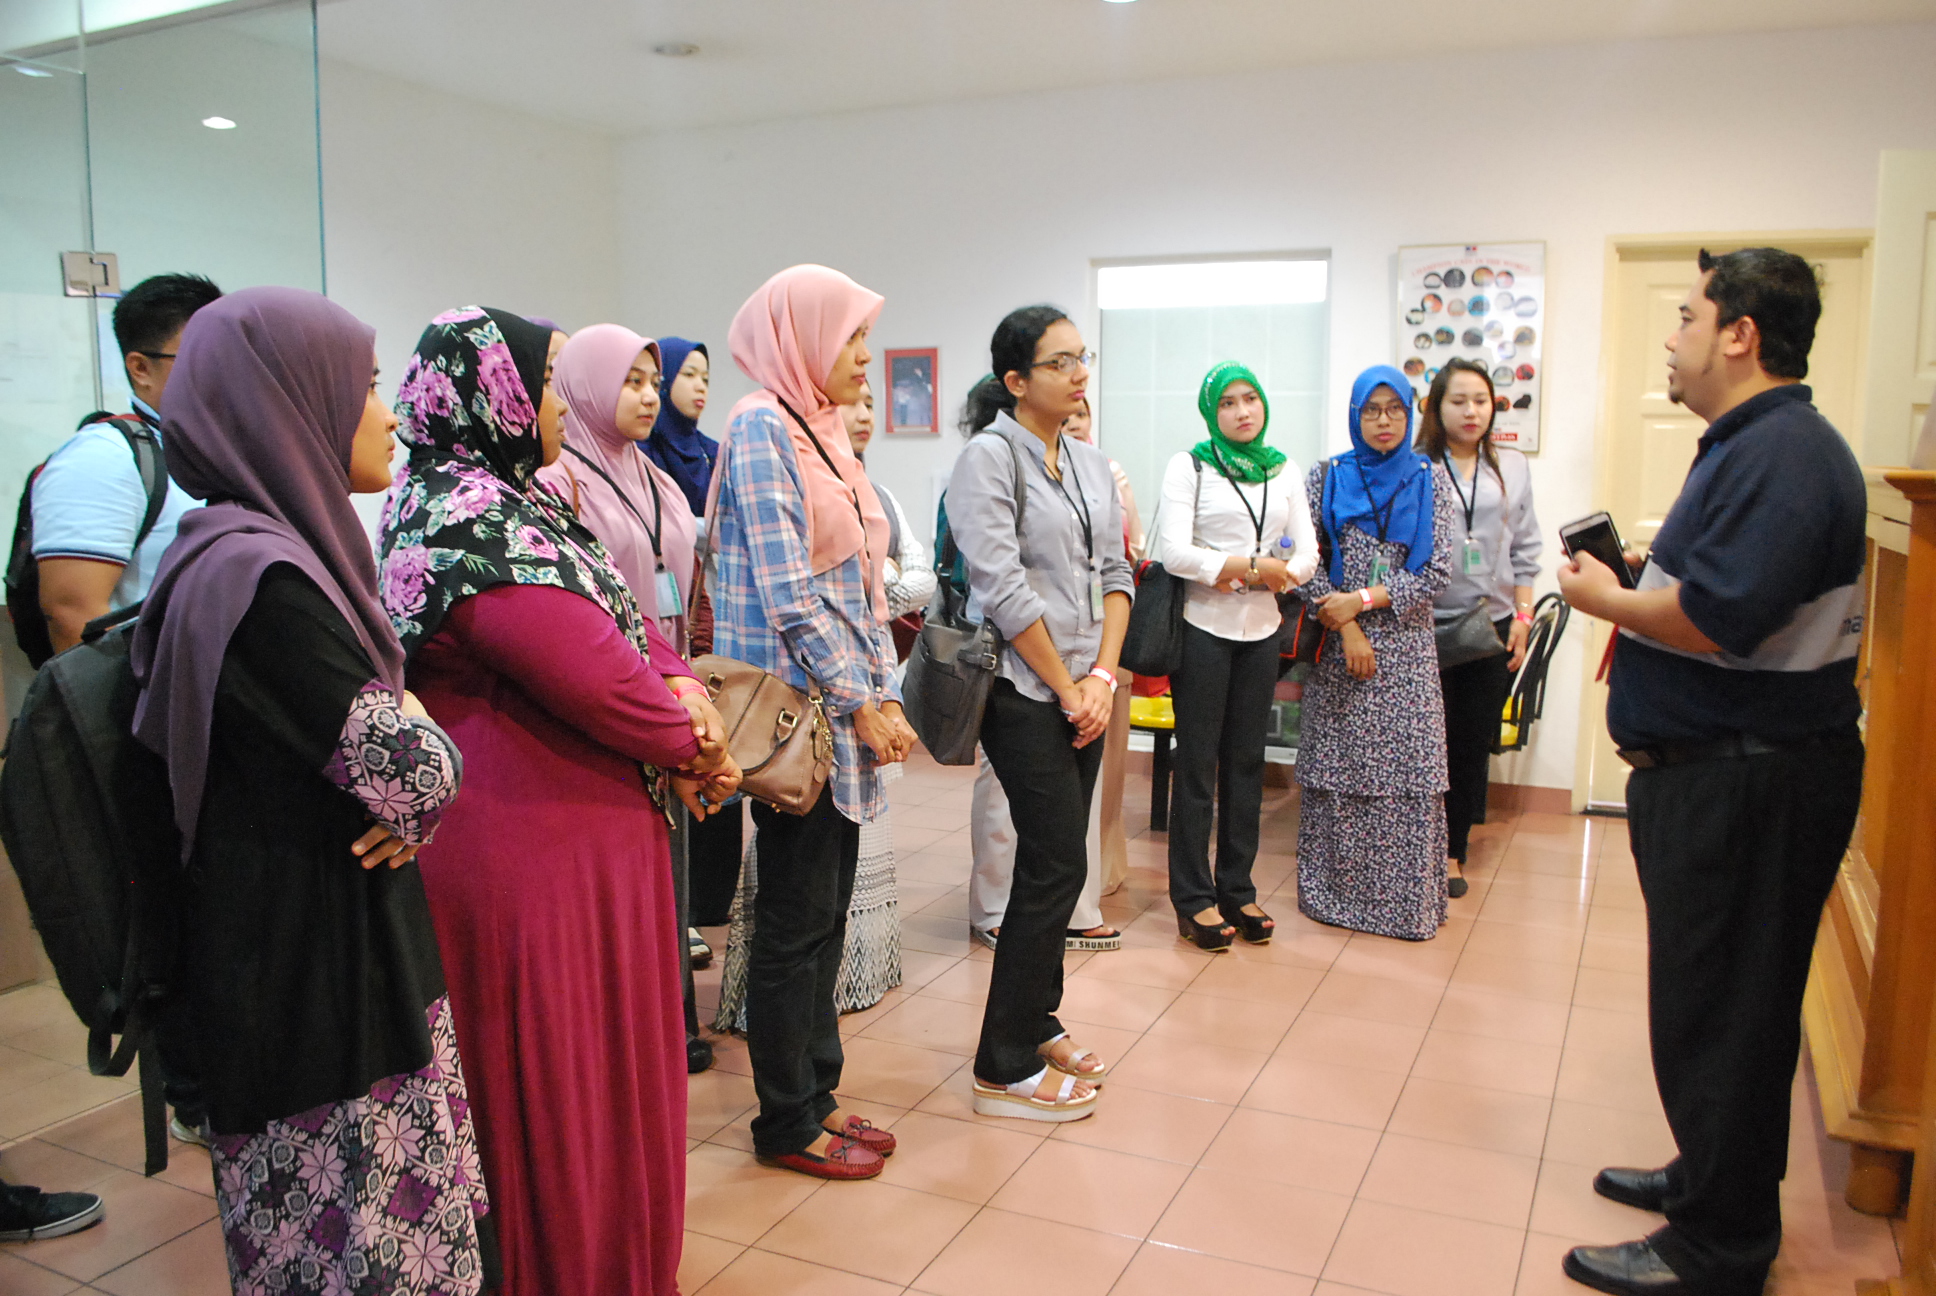 Briefing Session by MAB Kargo Sdn Bhd Animal Hotel personnel to Dewi Pet Shop Sdn Bhd Staff During the Animal Hotel Tour